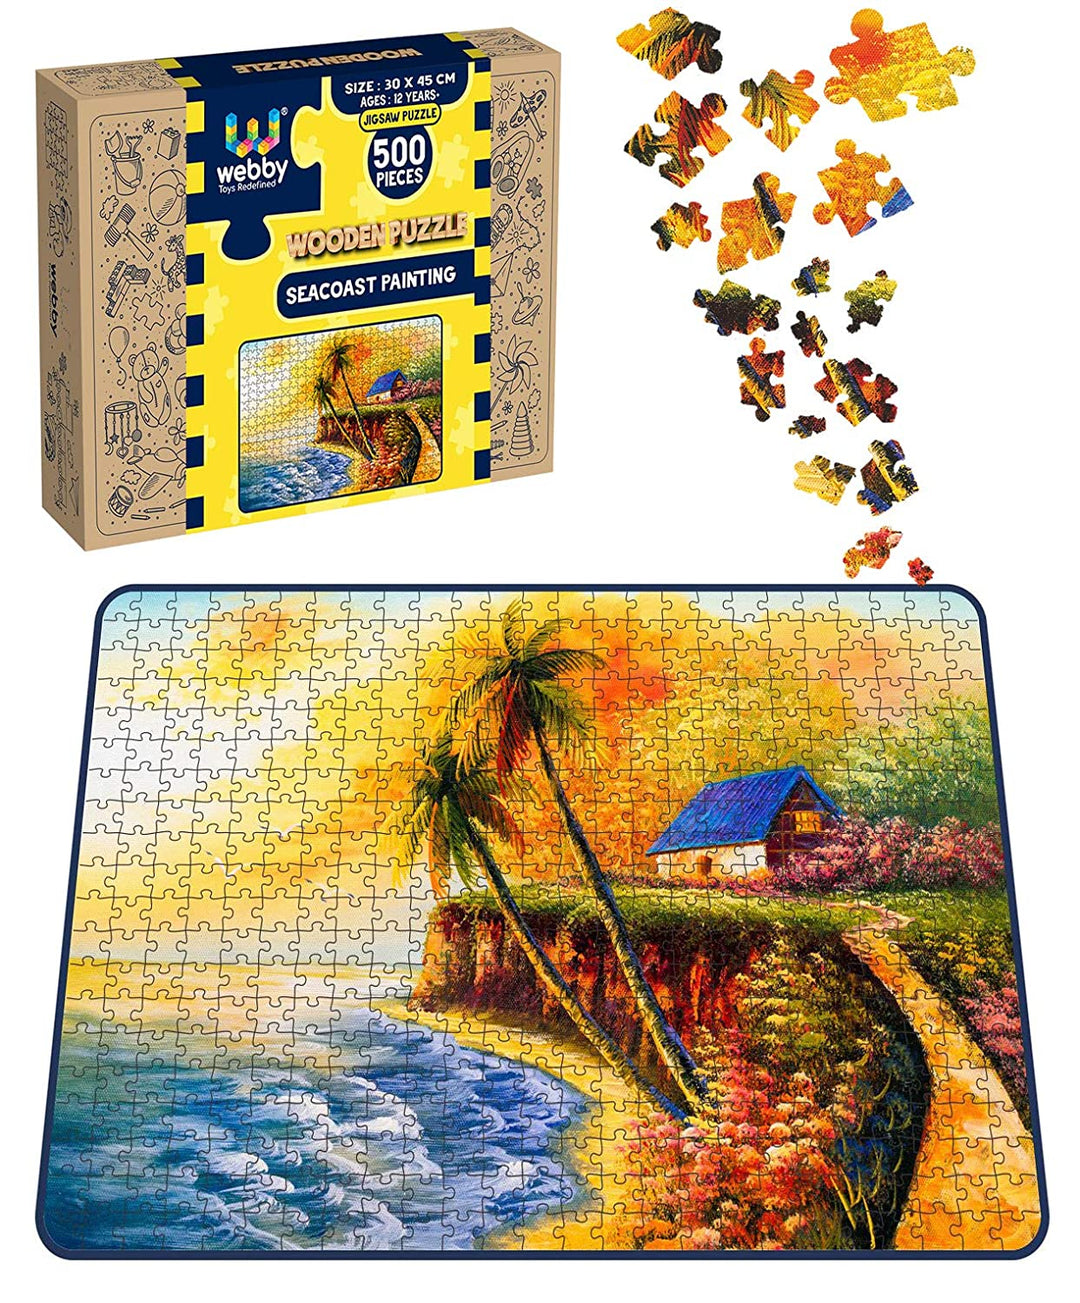 Webby Seacoast Painting Wooden Jigsaw Puzzle, 500 pieces